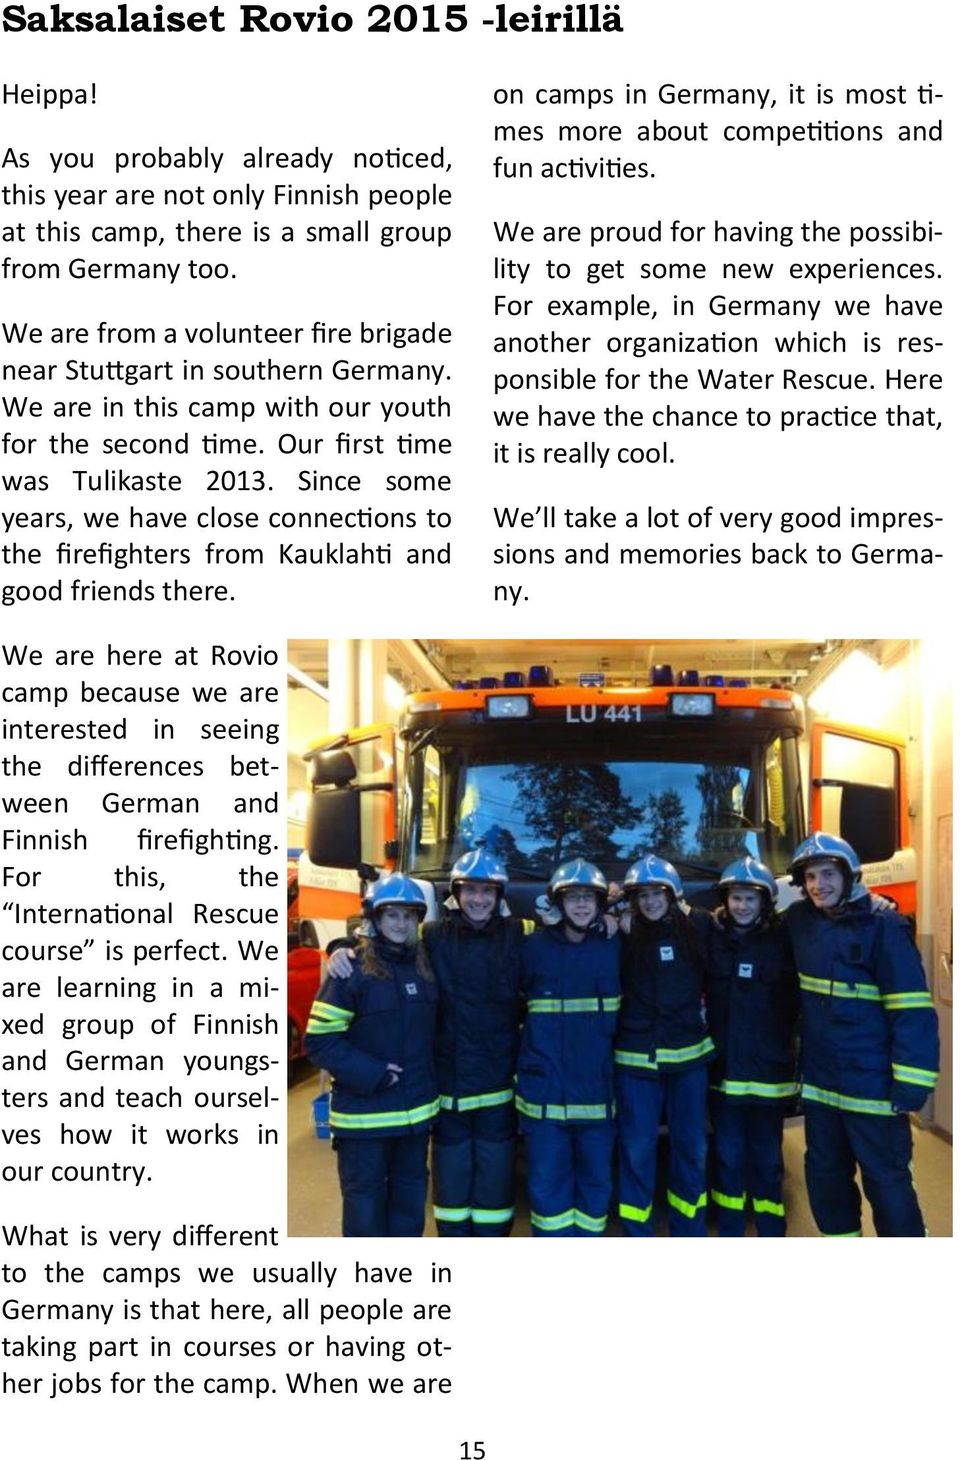 Since some years, we have close connections to the firefighters from Kauklahti and good friends there. on camps in Germany, it is most times more about competitions and fun activities.